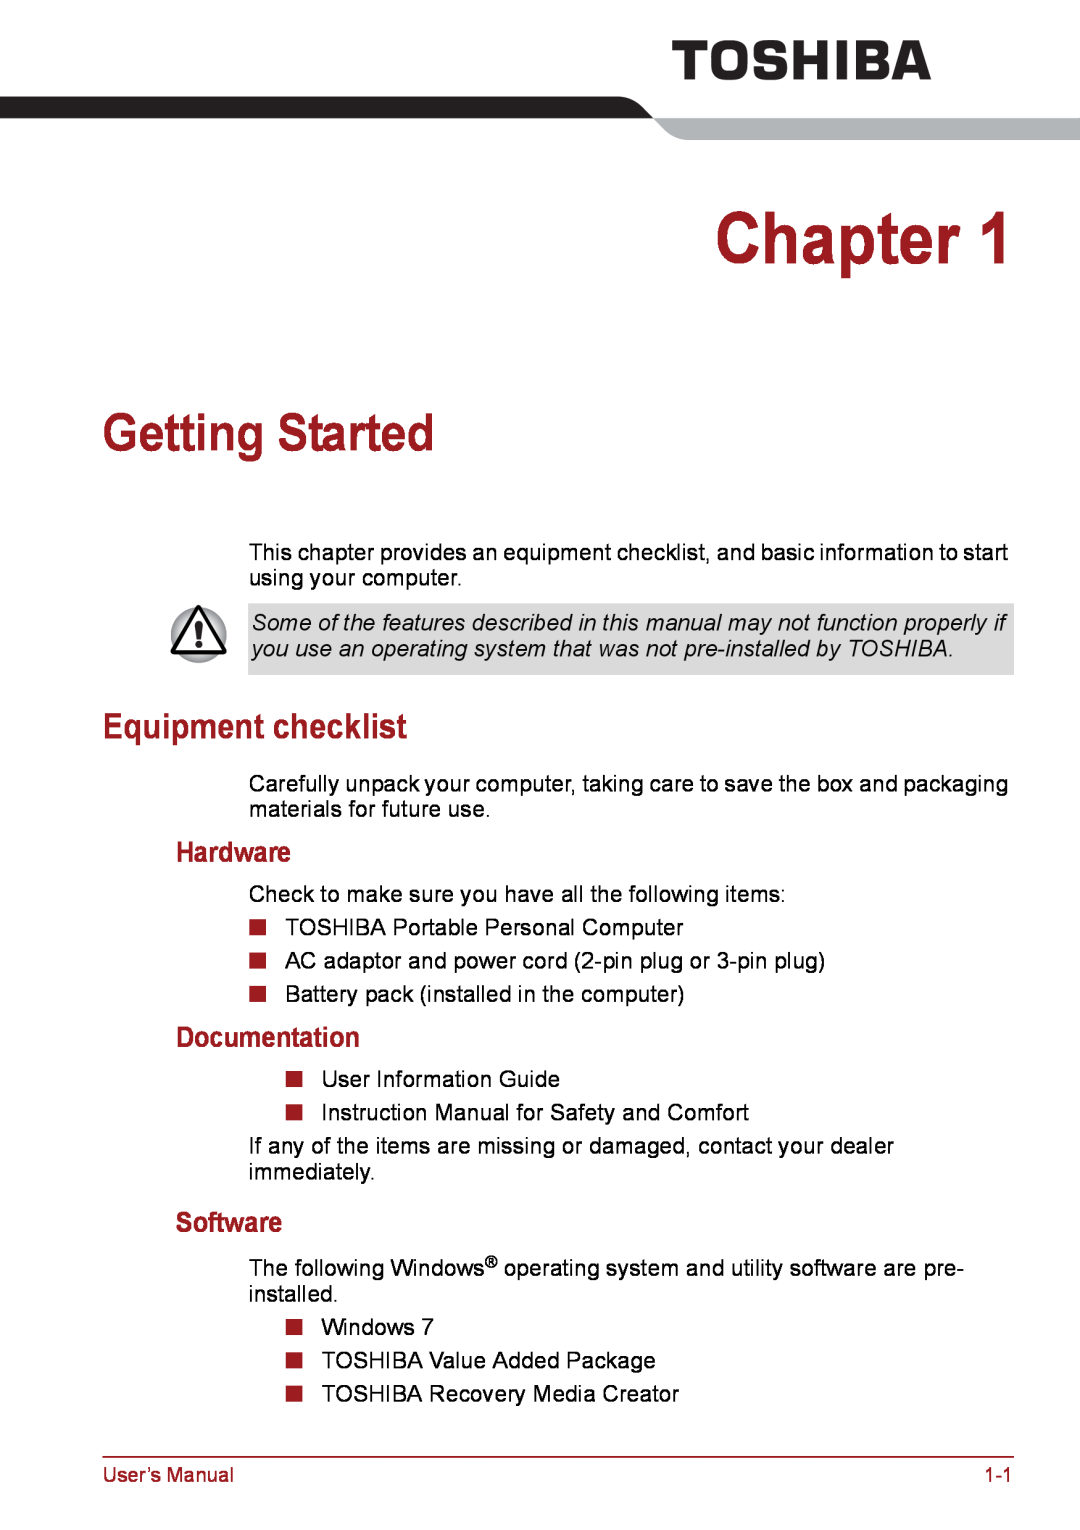 Toshiba PSC08U-02D01D user manual Chapter, Getting Started, Equipment checklist, Hardware, Documentation, Software 